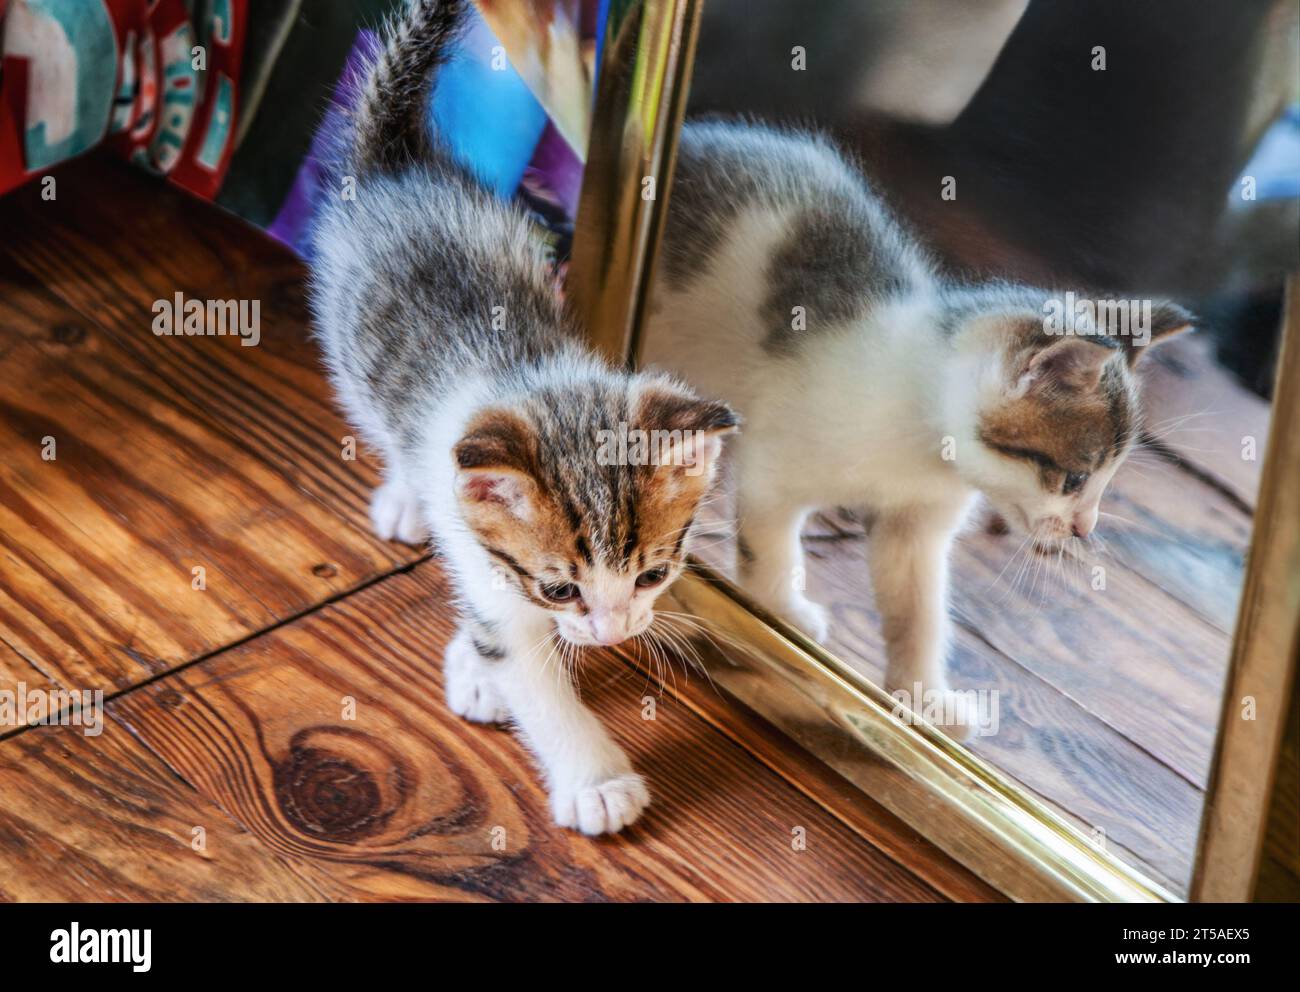 baby kitten sited on a wooden floor , reflected in a mirror, at a shelter sponsored by a charity Stock Photo